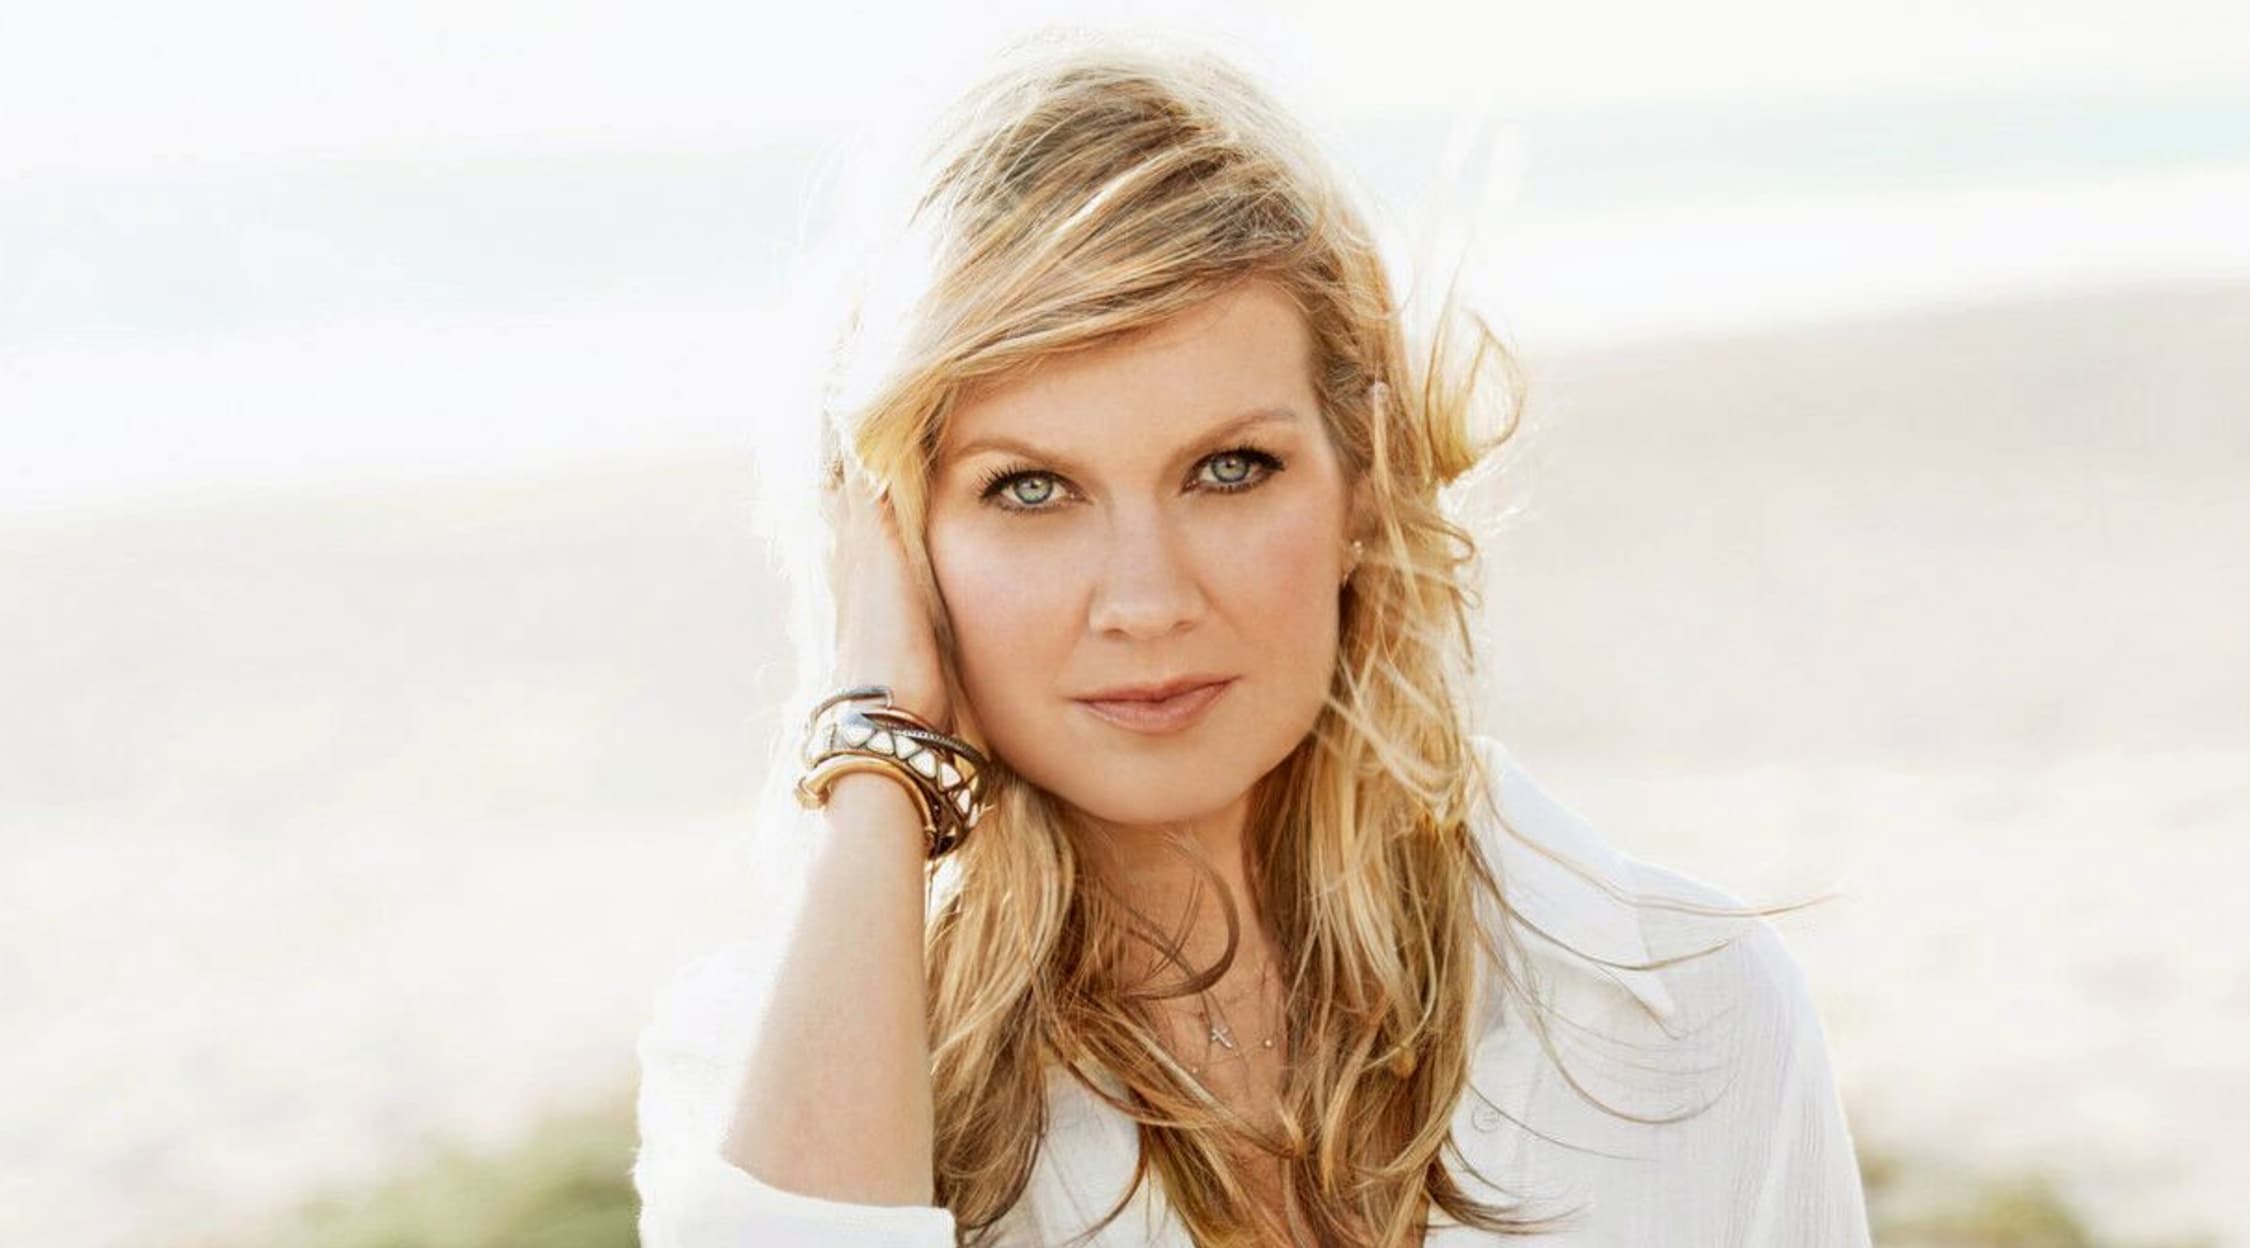 Natalie Grant Tickets Natalie Grant Concert Tickets and Tour Dates